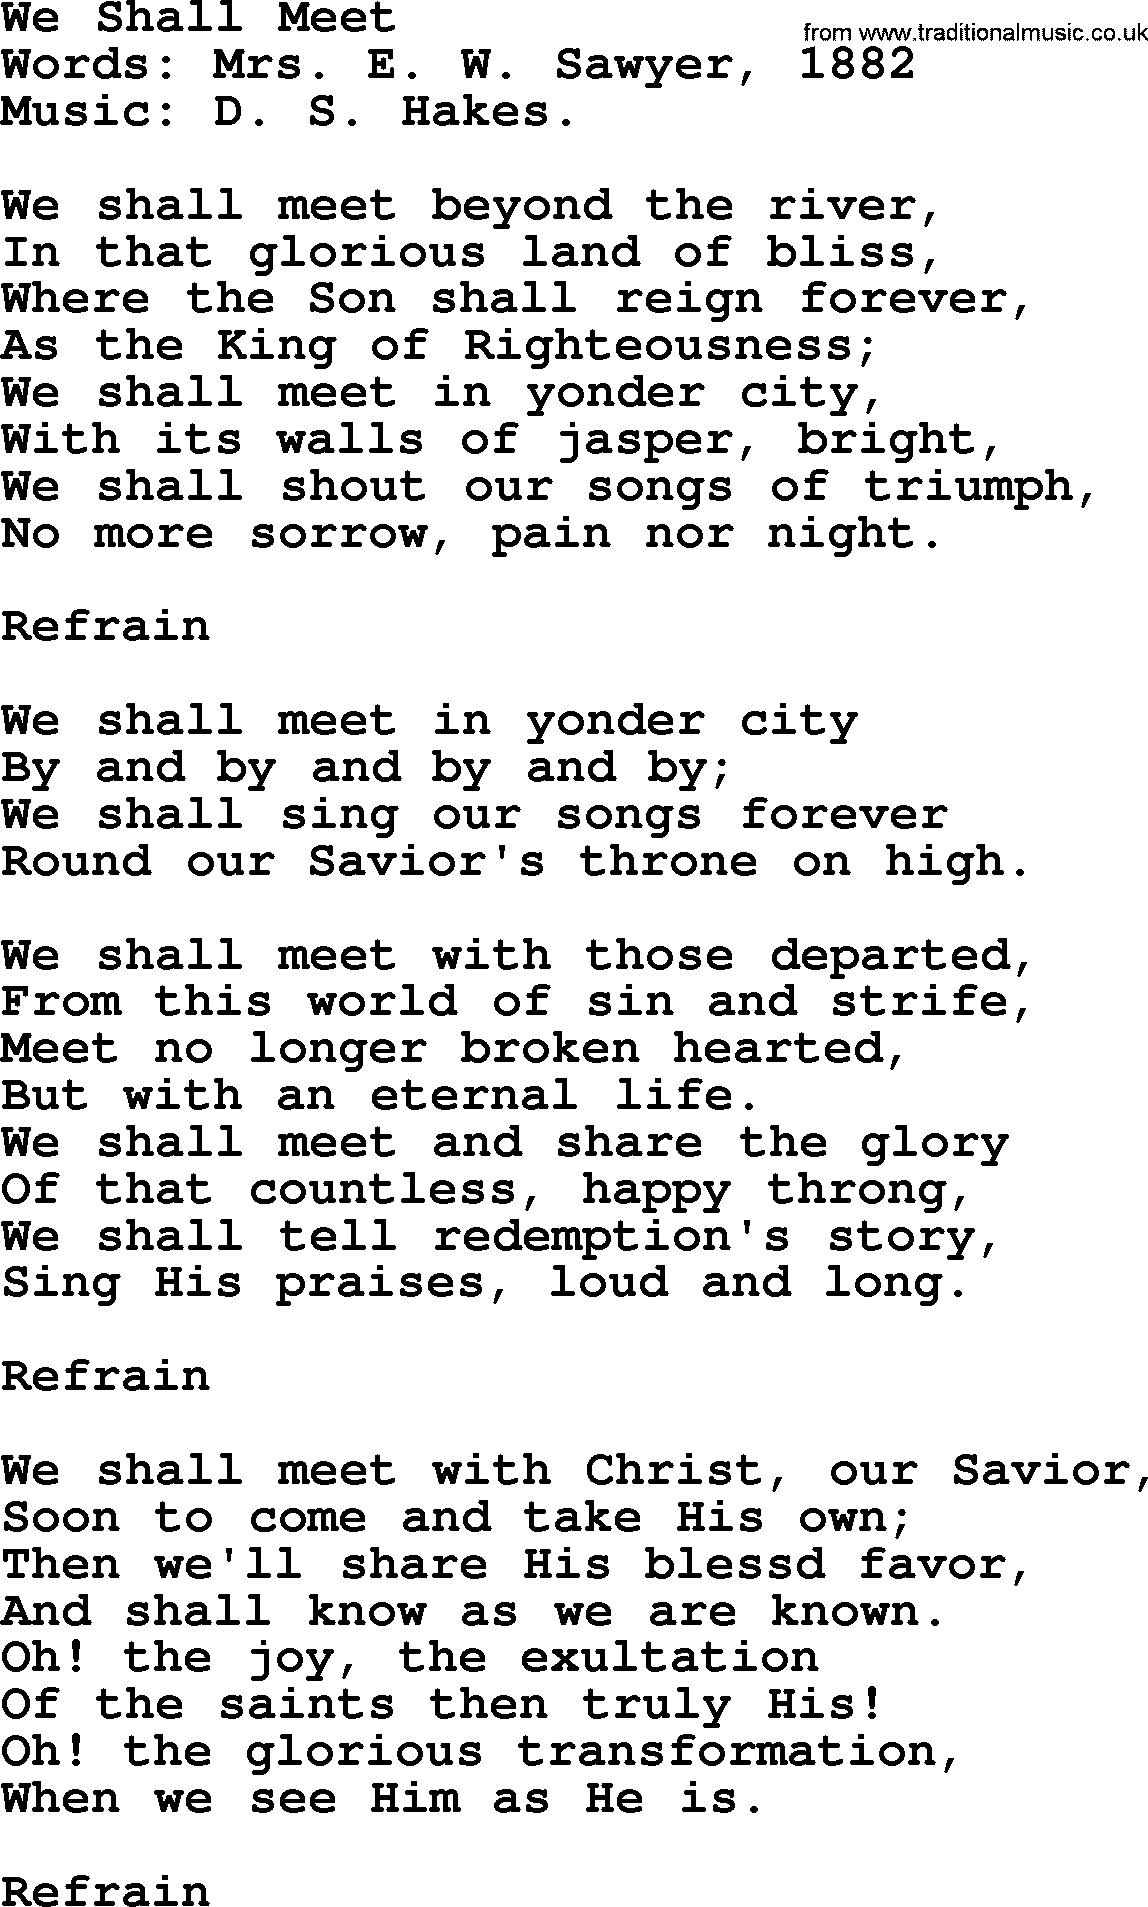 Songs and Hymns about Heaven: We Shall Meet lyrics with PDF